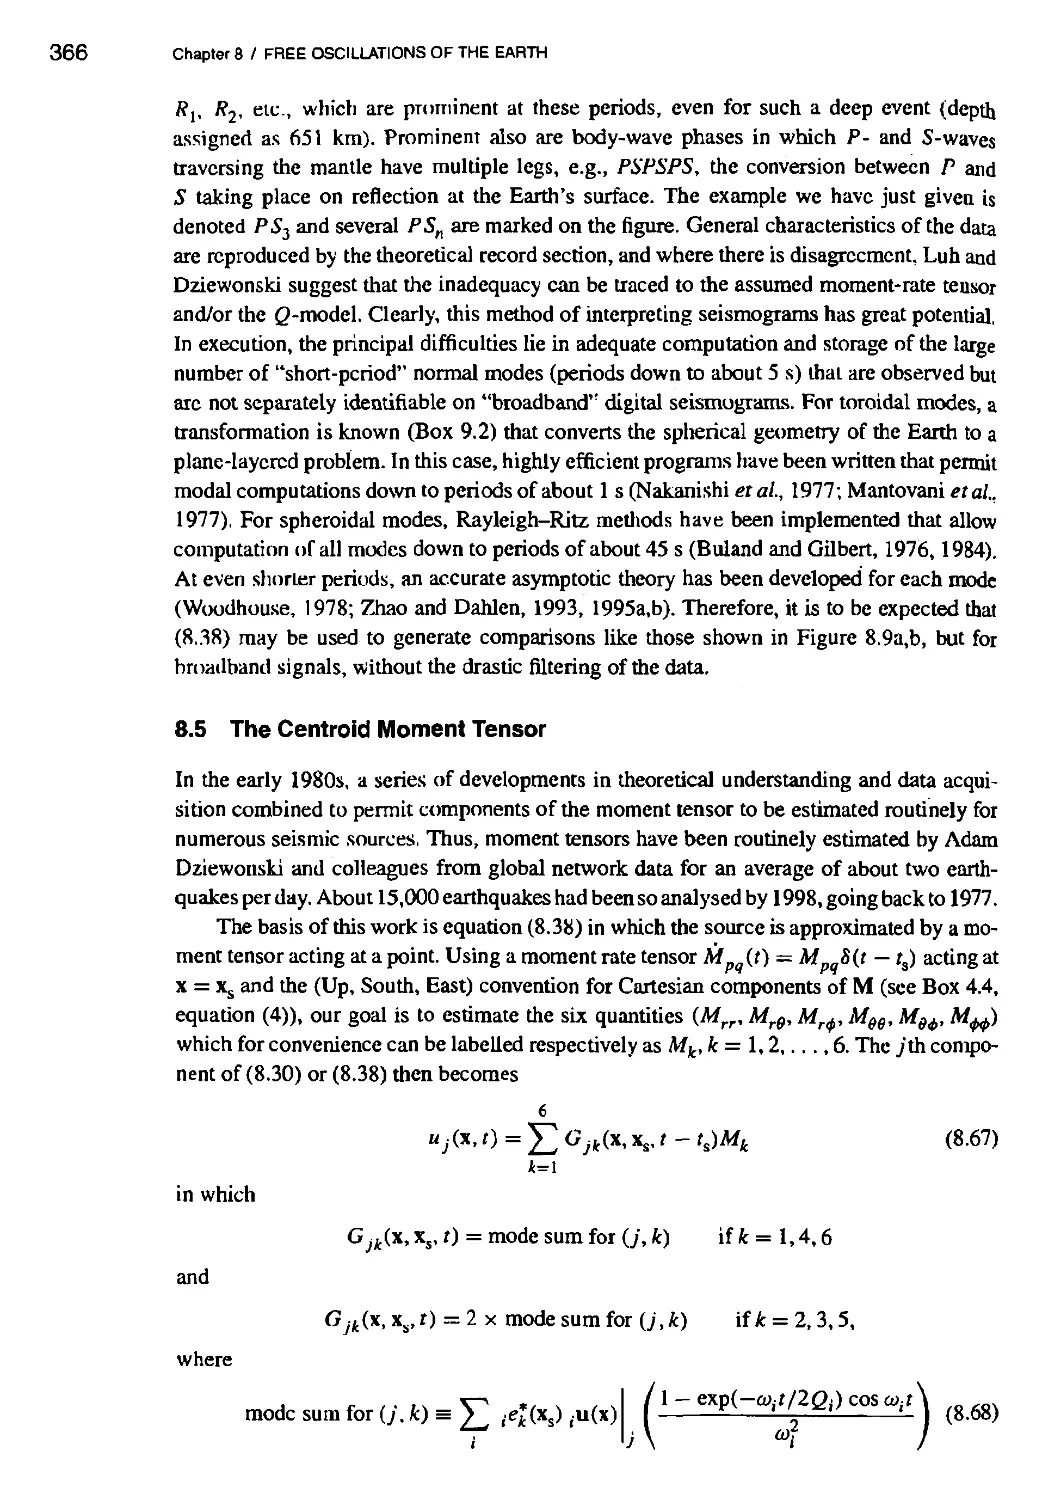 8.5 The Centroid Moment Tensor